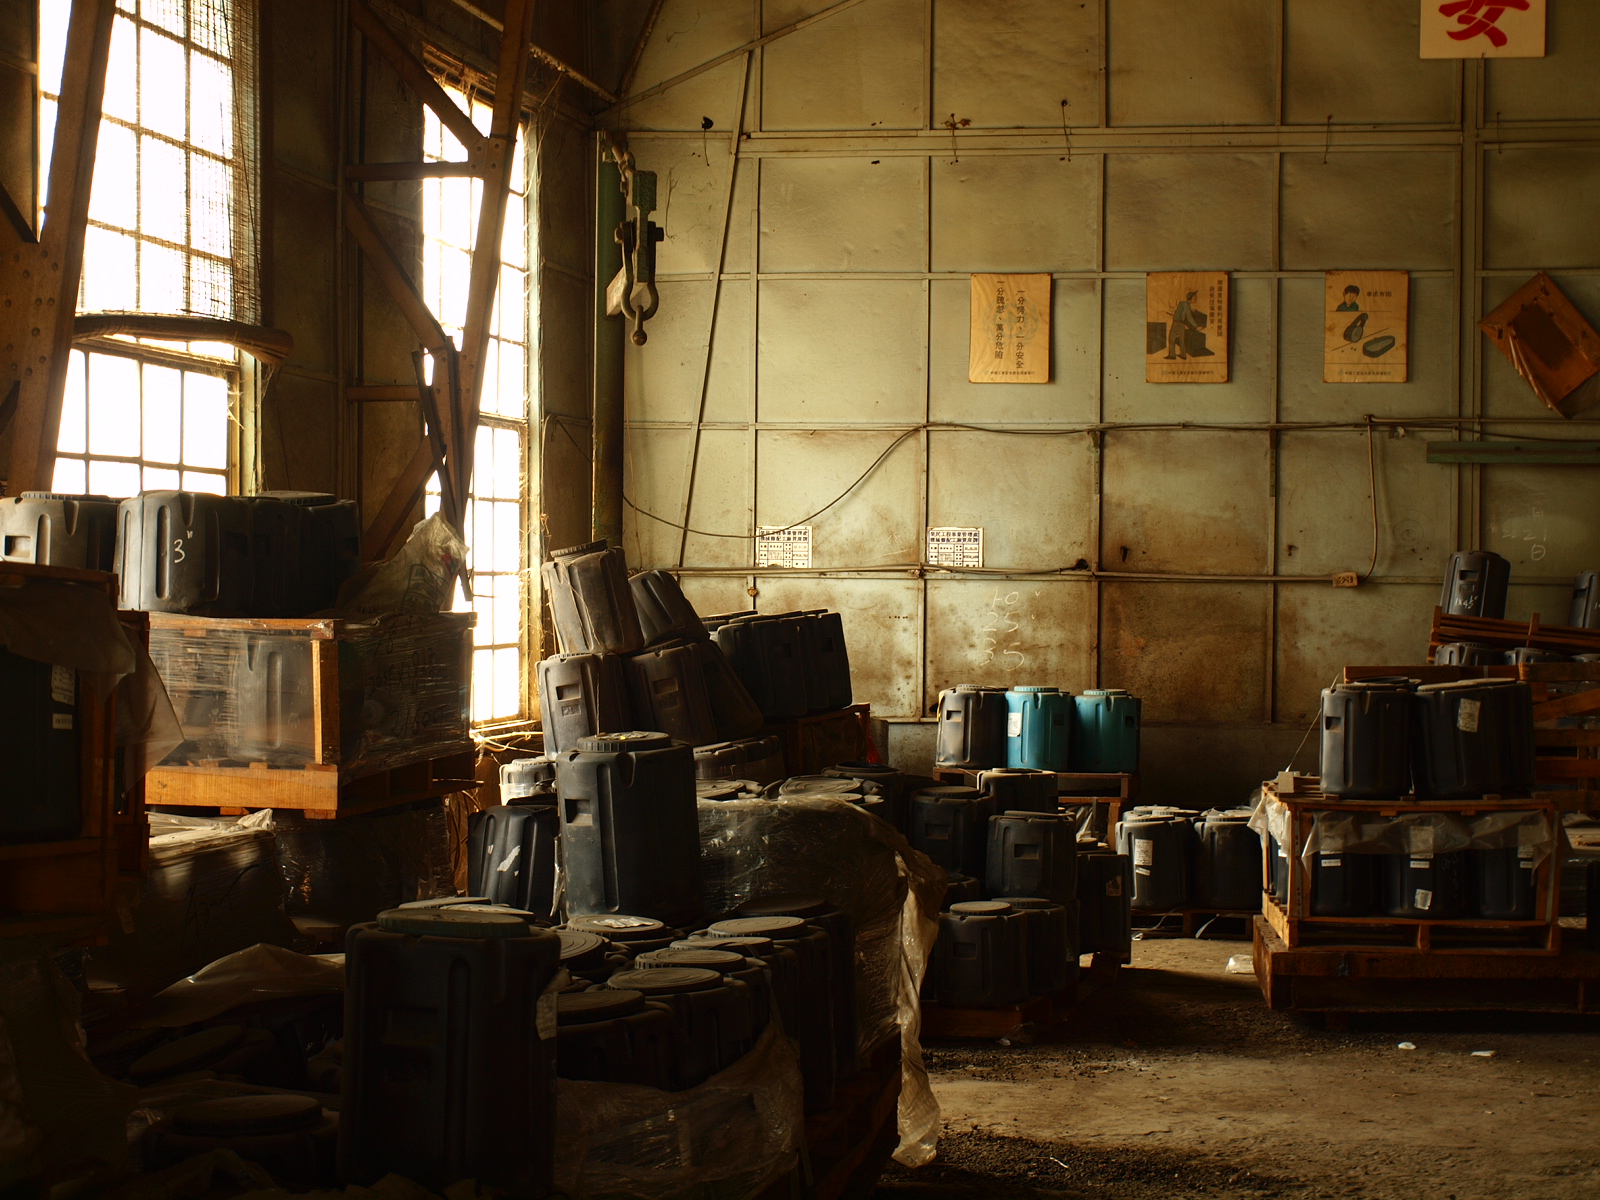 an abandoned room with many stacks of old barrels and boxes